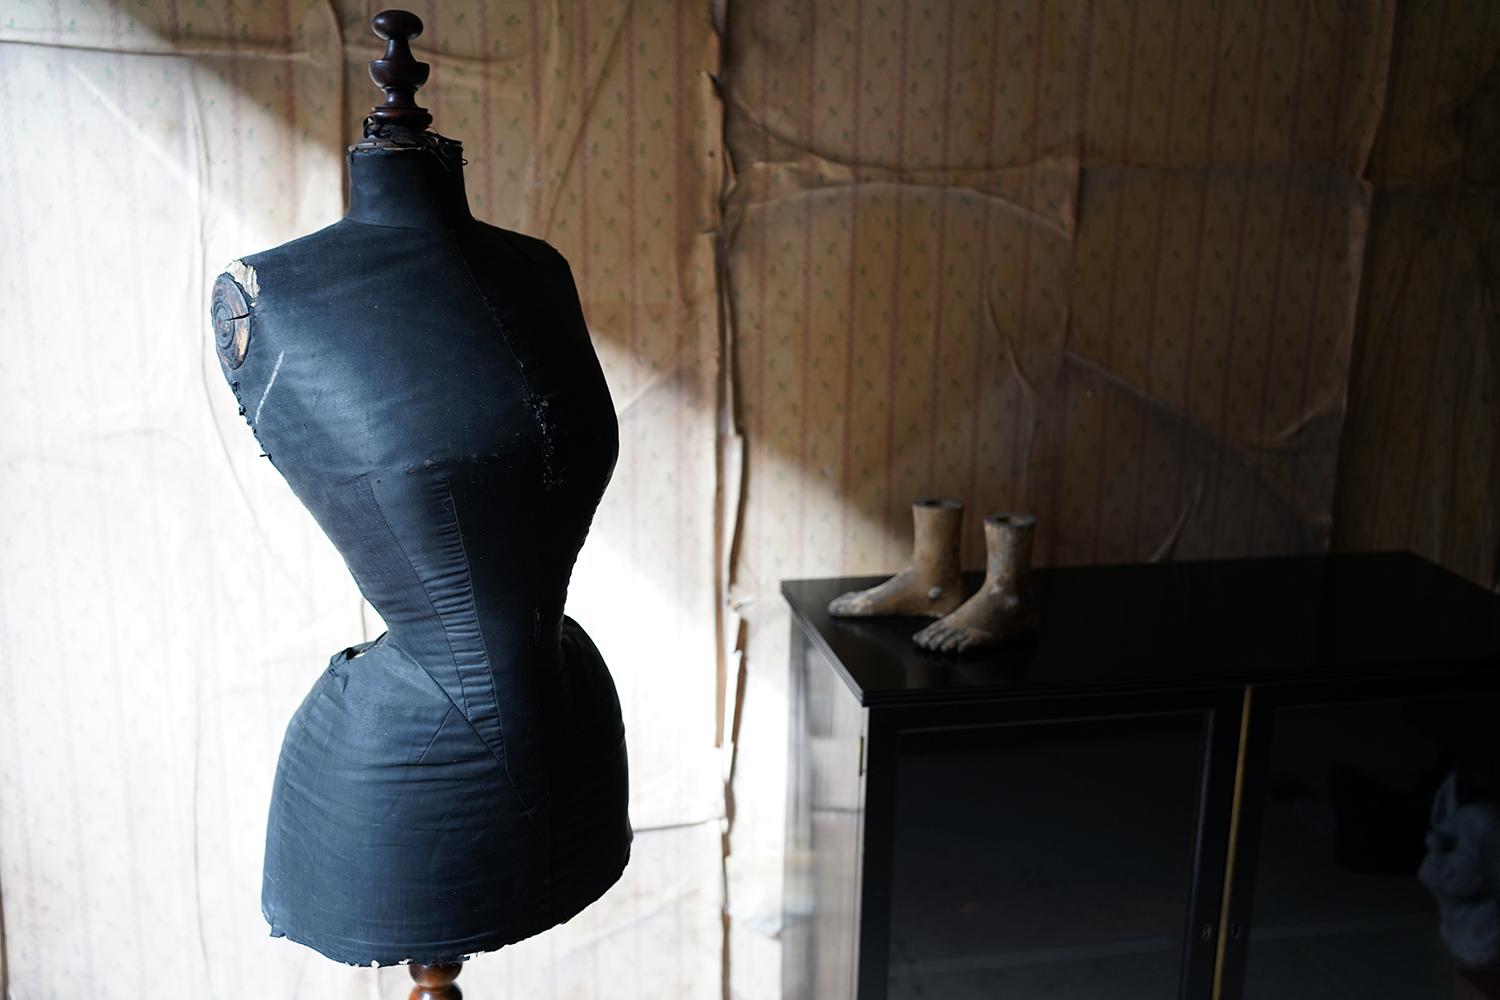 The good quality shop display mannequin having a well-turned adjustable bobbin stand to a wasp waisted form of Parisian origin, having hand written numbering ‘35670’ and ‘Paris’ to its underside, with the original black linen covering, to a turned